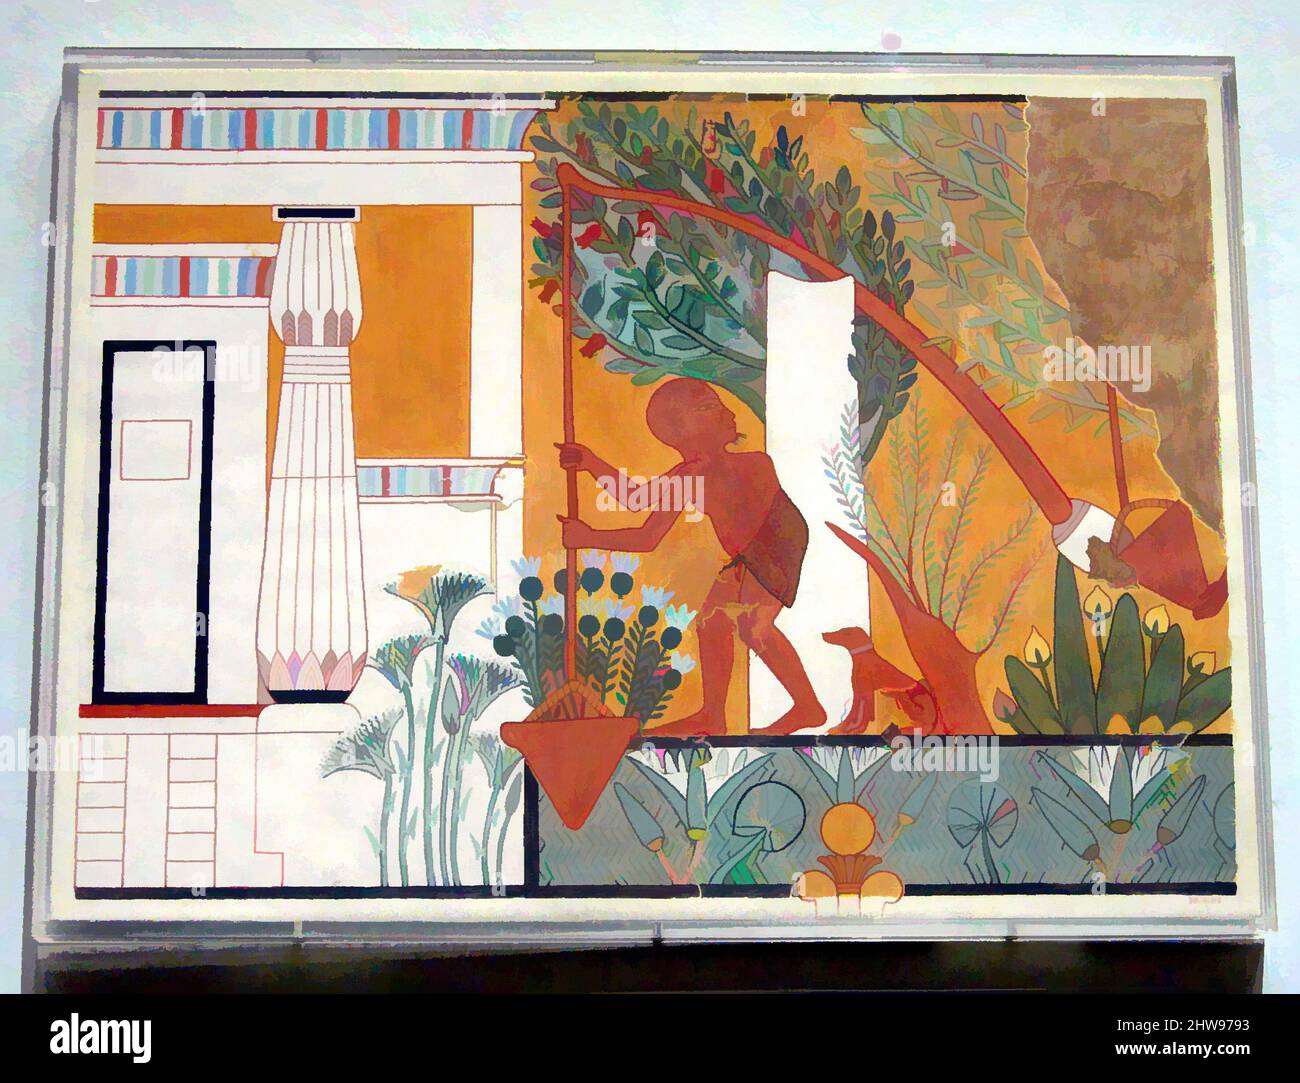 Art inspired by Garden Scene, Tomb of Ipuy, New Kingdom, Ramesside, Dynasty 19, ca. 1295–1213 B.C., Original from Egypt, Upper Egypt, Thebes, Deir el-Medina, Tempera on paper, facsimile: h. 35 cm (13 3/4 in); w. 48 cm (18 7/8 in), Norman de Garis Davies (1865–1941, Classic works modernized by Artotop with a splash of modernity. Shapes, color and value, eye-catching visual impact on art. Emotions through freedom of artworks in a contemporary way. A timeless message pursuing a wildly creative new direction. Artists turning to the digital medium and creating the Artotop NFT Stock Photo